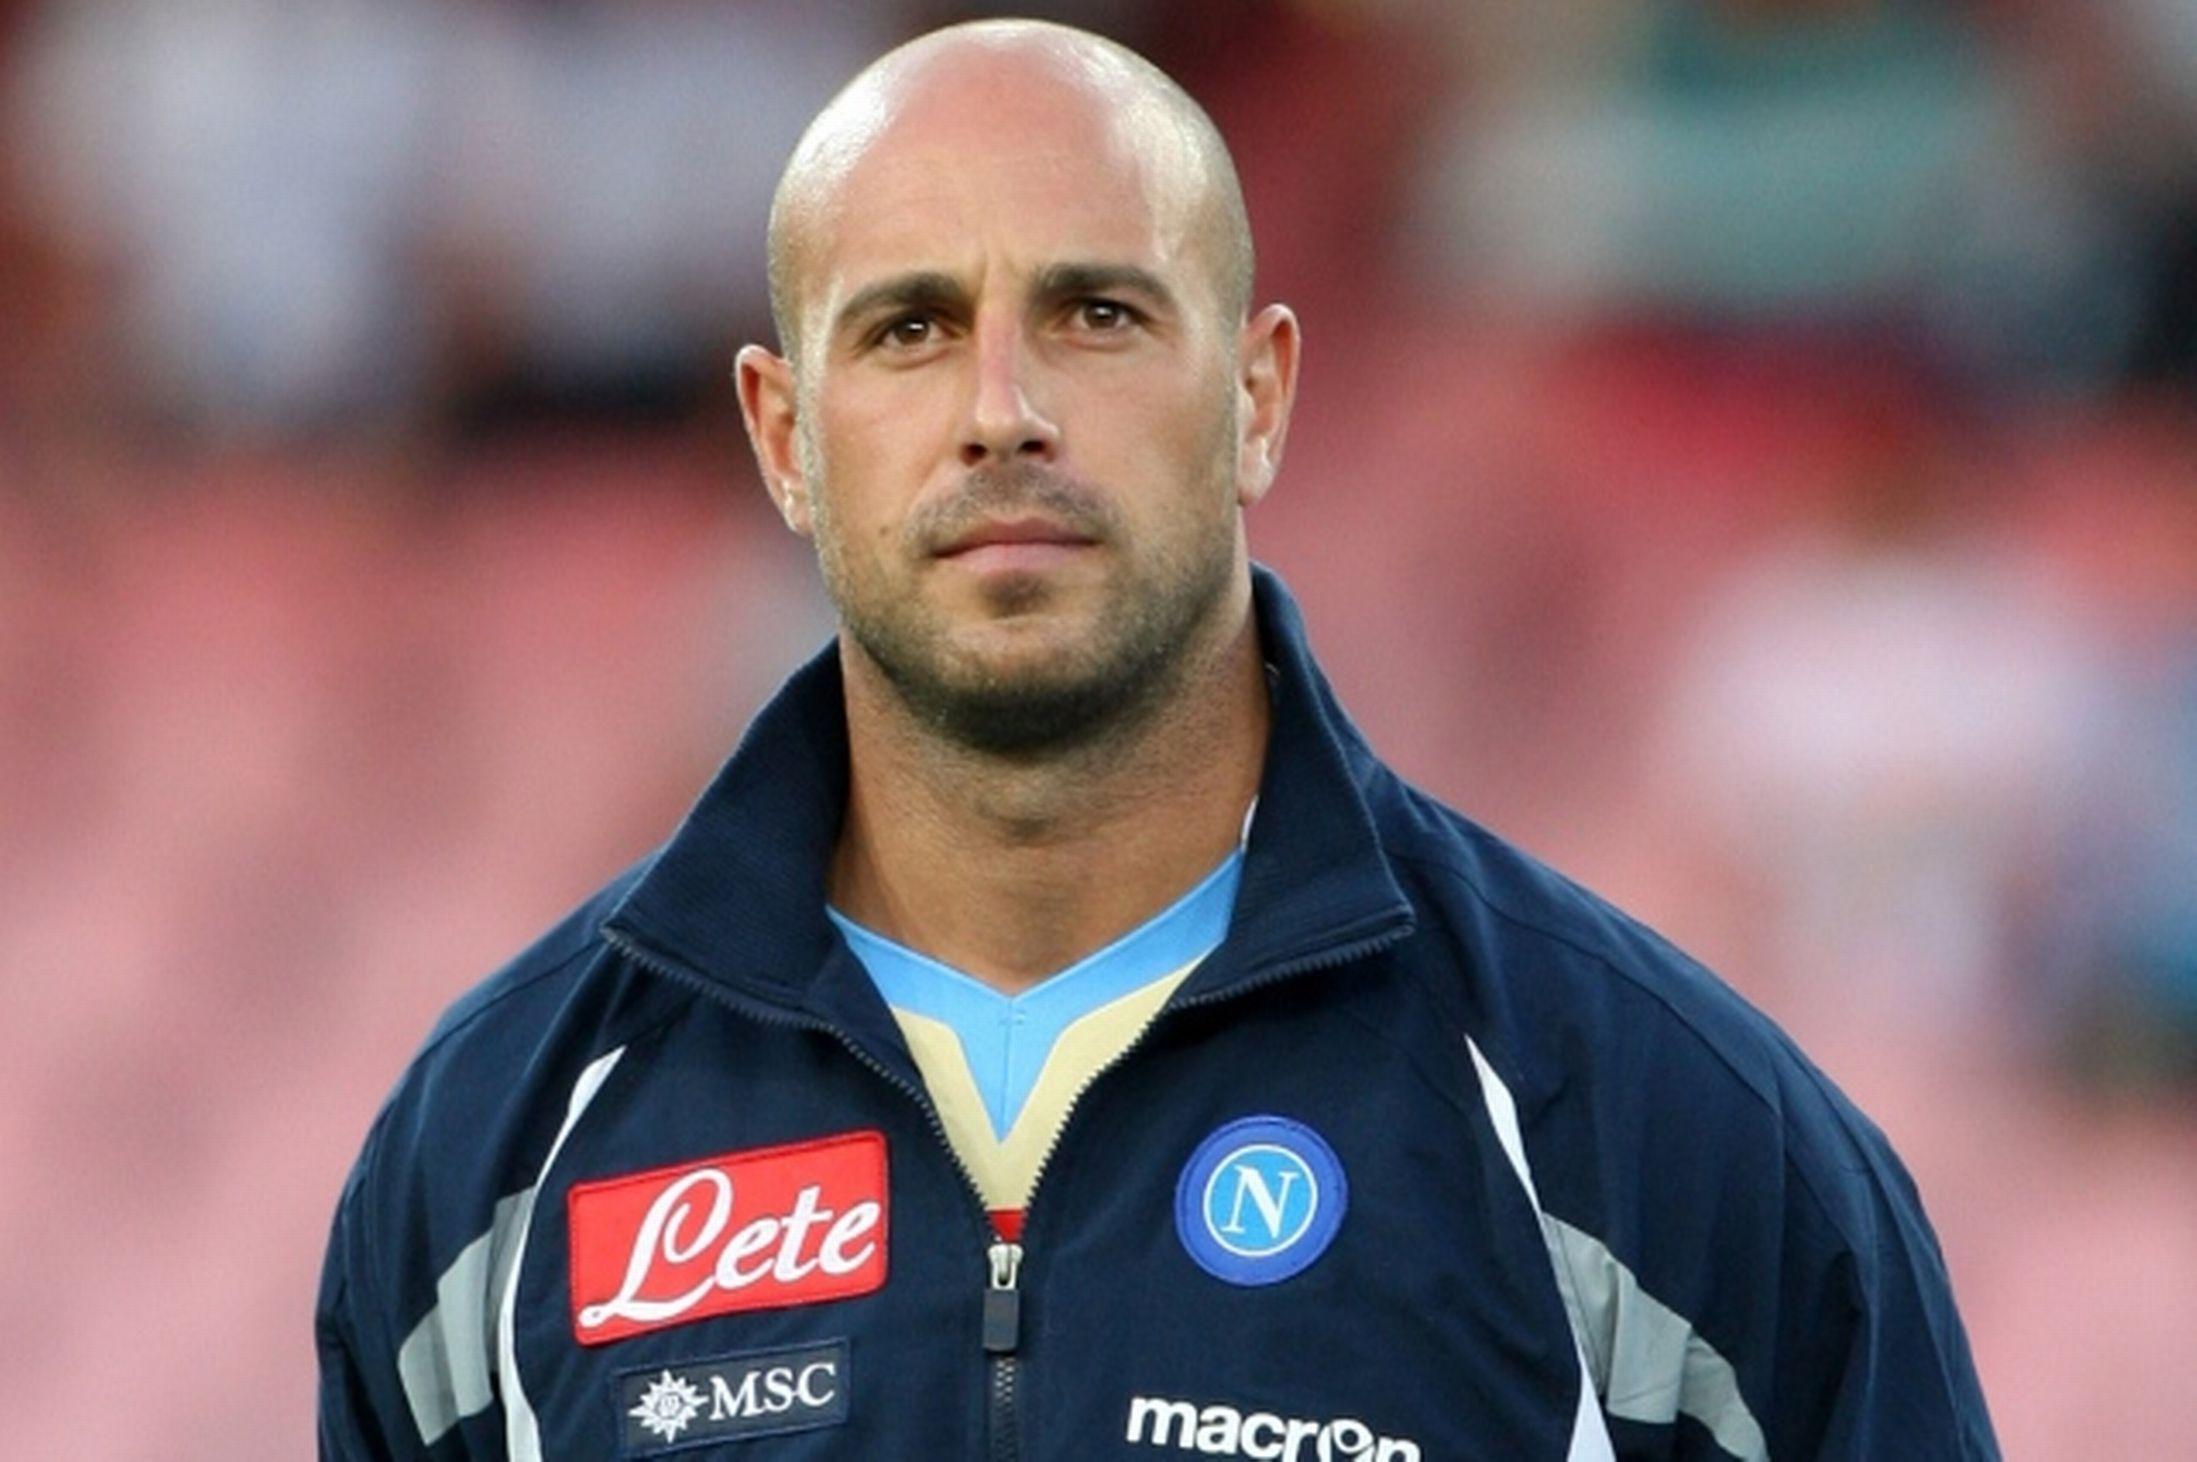 The player of Napoli Pepe Reina before the game wallpaper